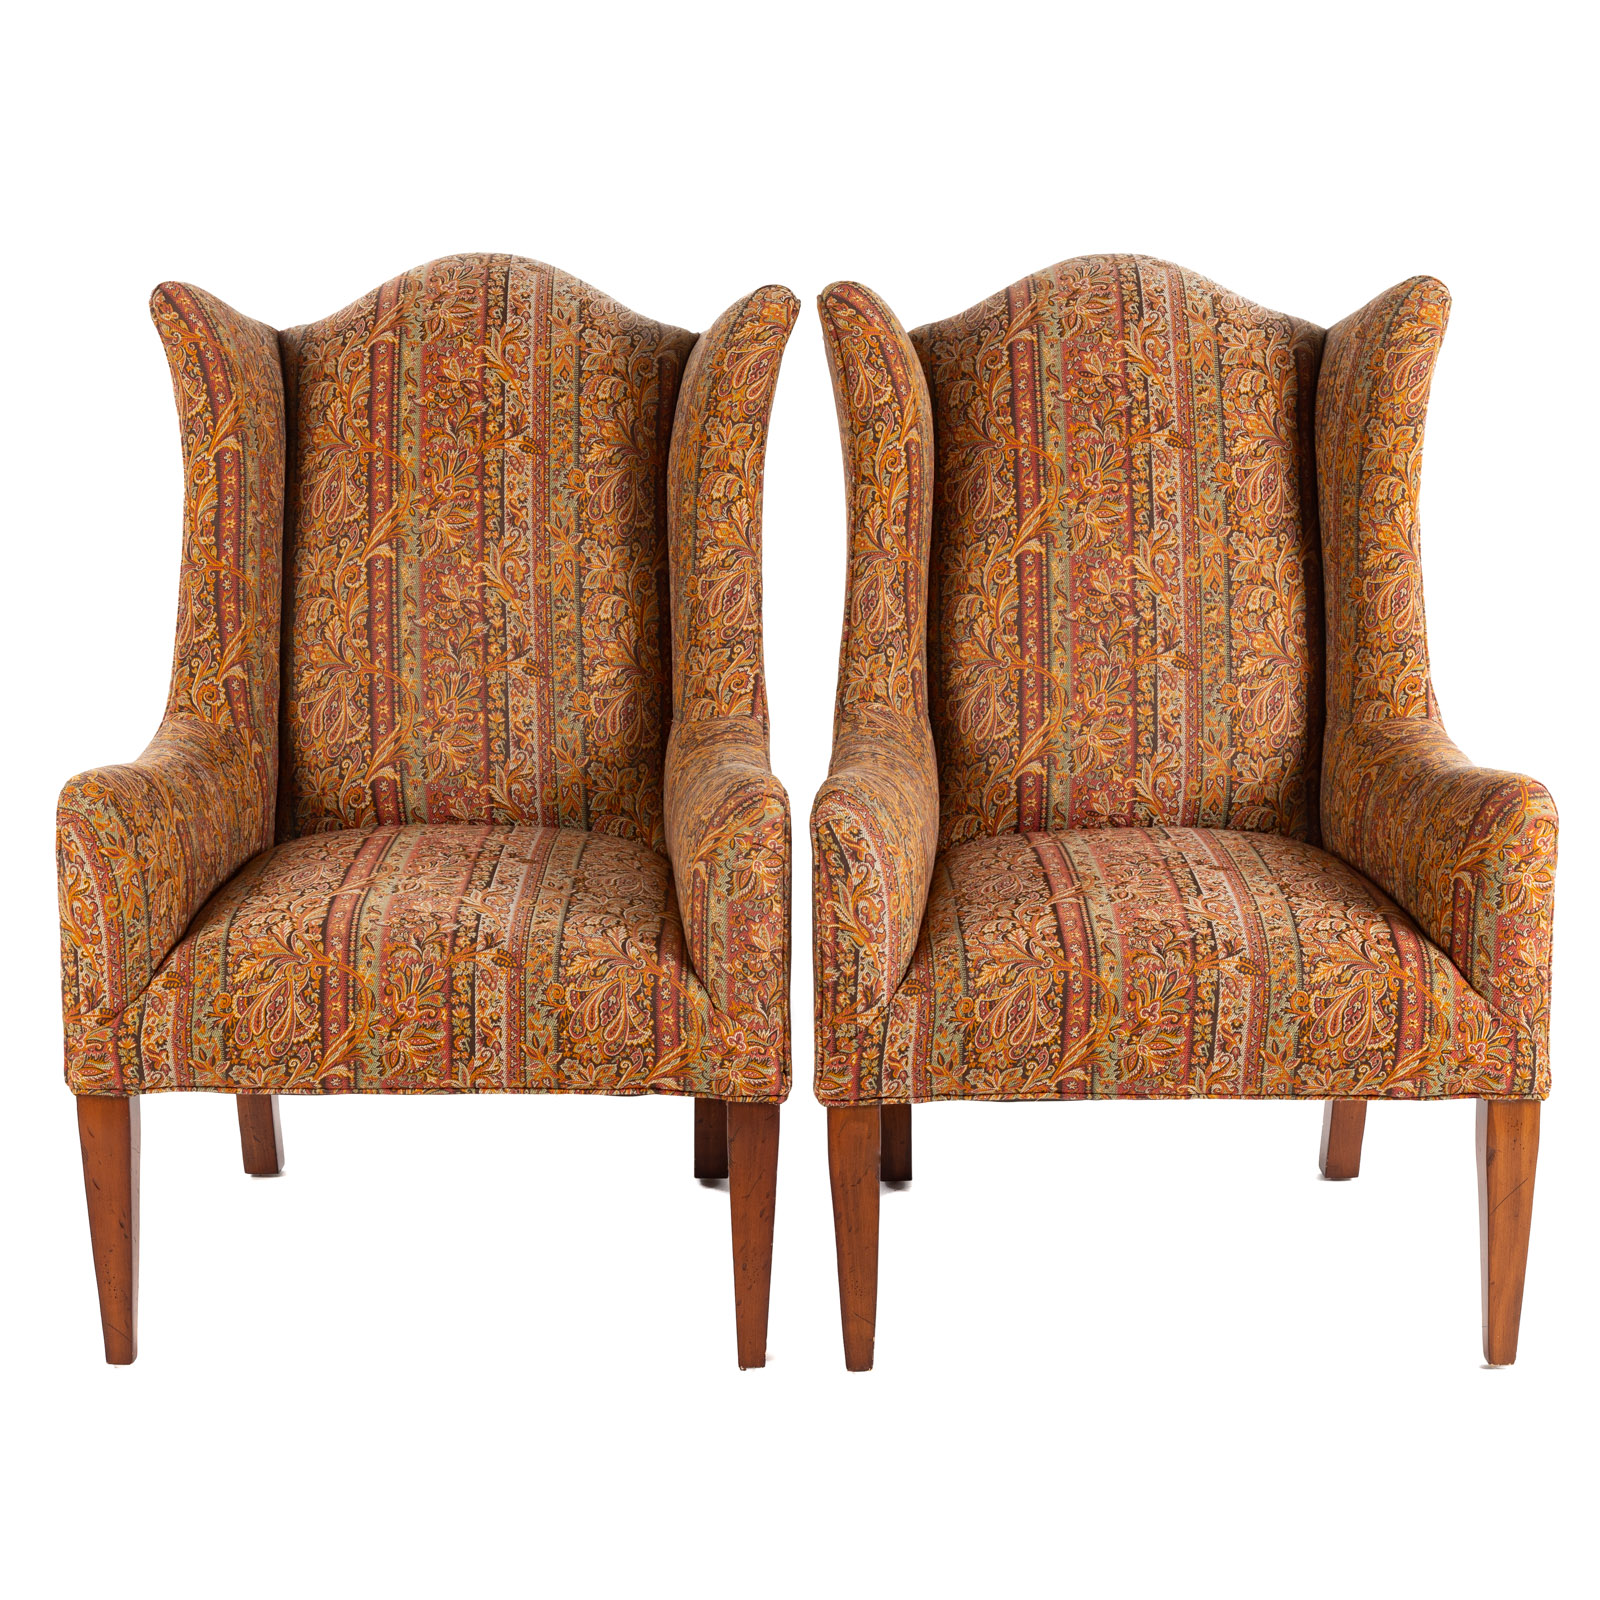 A PAIR OF CONTEMPORARY UPHOLSTERED 36940d